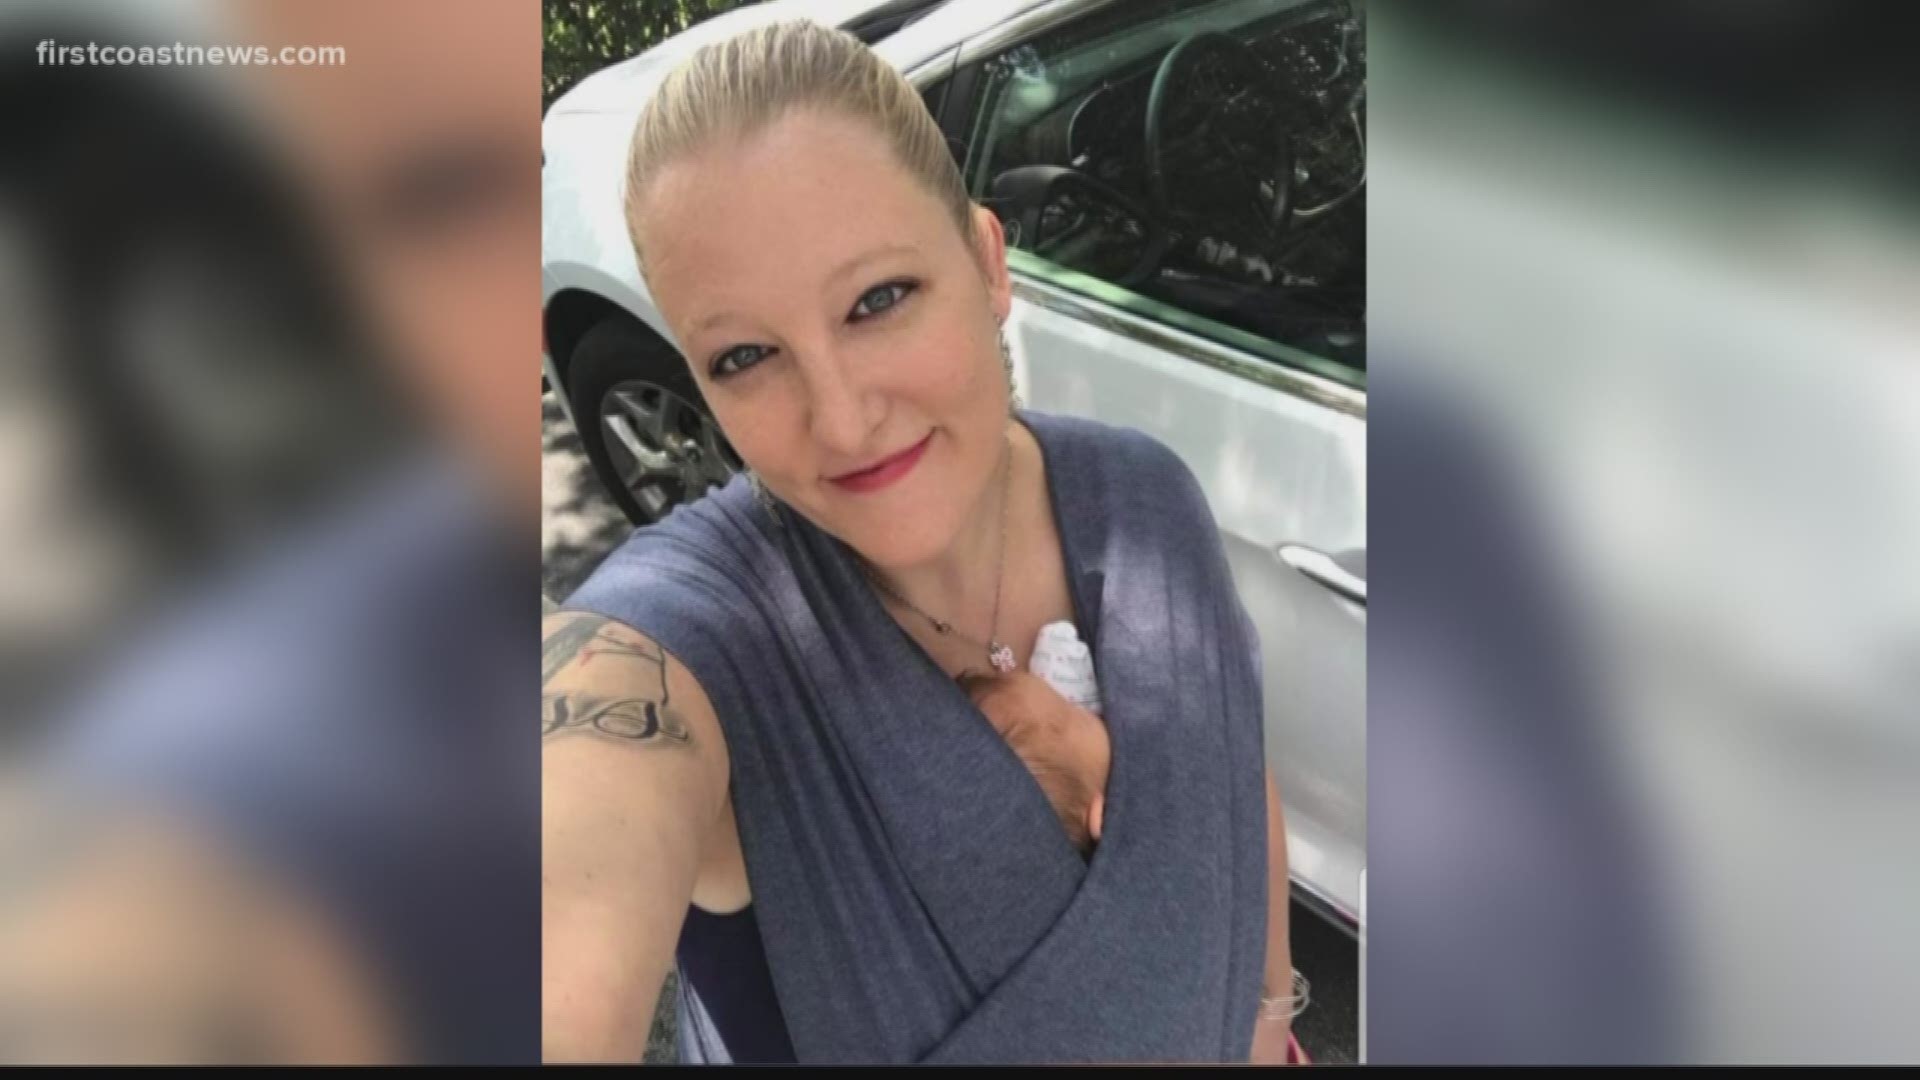 The Marion County Sheriff's Office confirms the body of Casei Jones, 32, was found in a car near Brantley County, Georgia. Her husband, Michael, somehow had gotten the car into a crash, leading to the discovery of her body.